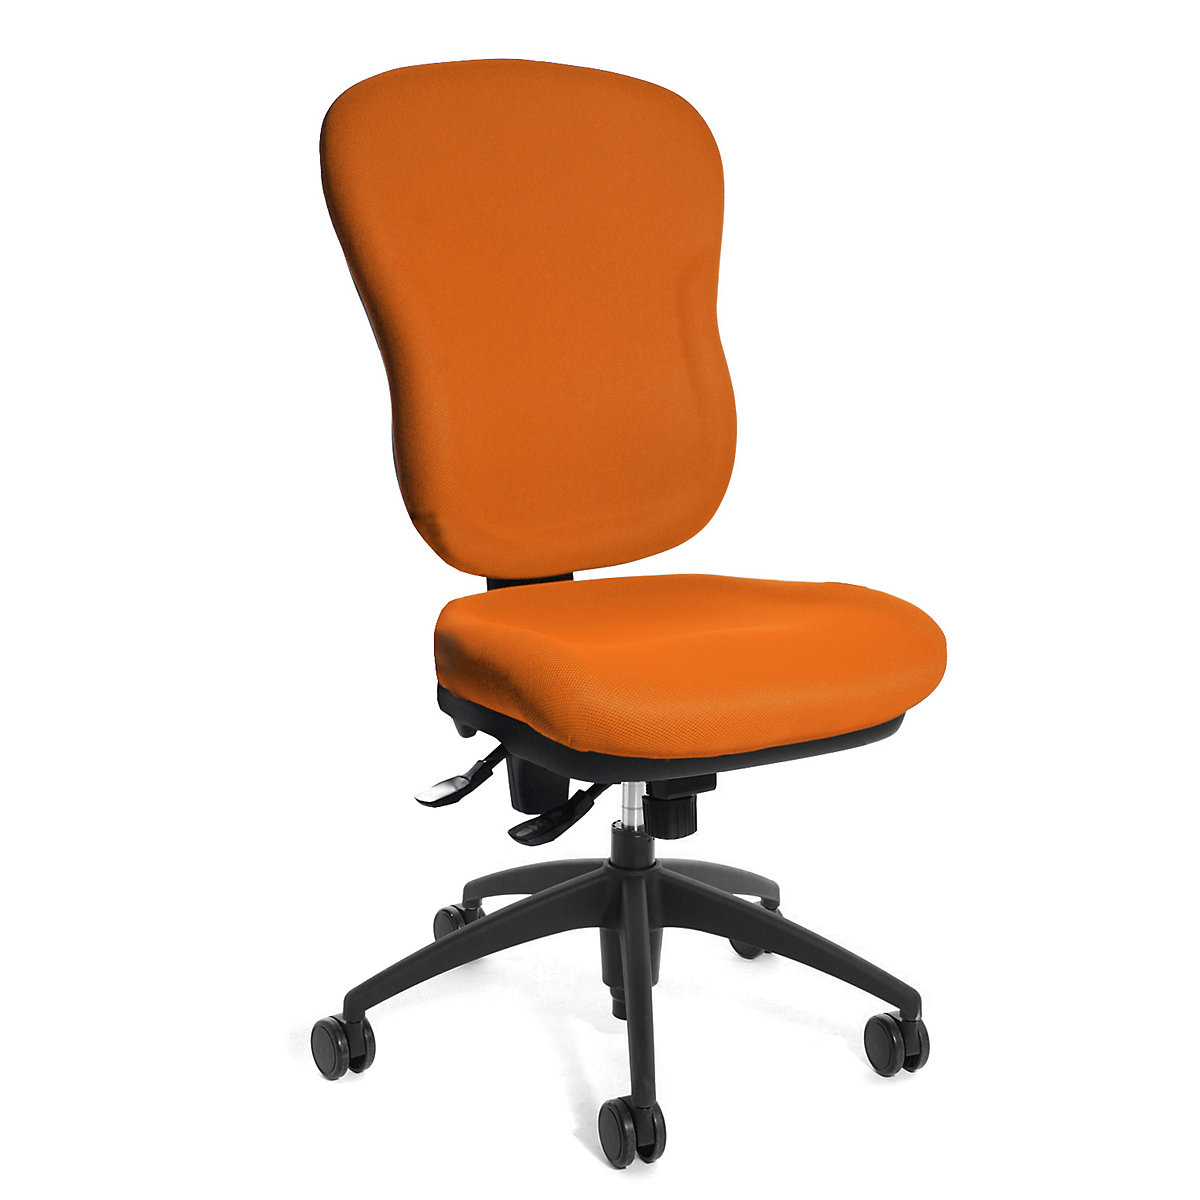 WELLPOINT 30 SY office swivel chair – Topstar, high backed chair with shaped foam padding, orange-4